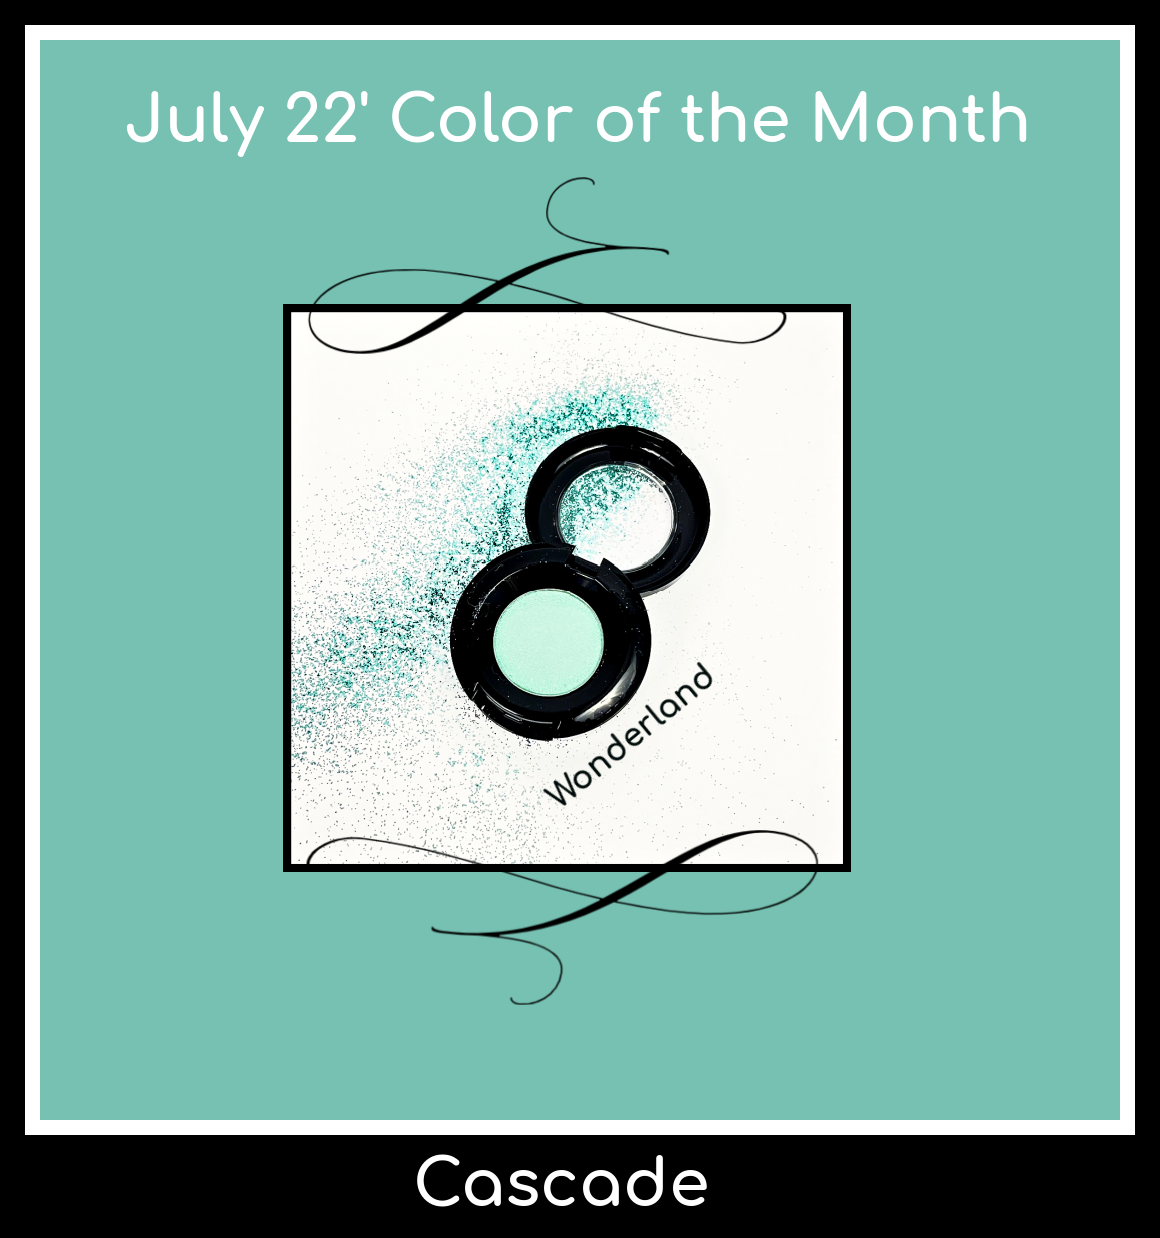 July 2022's Color of the Month is Cascade